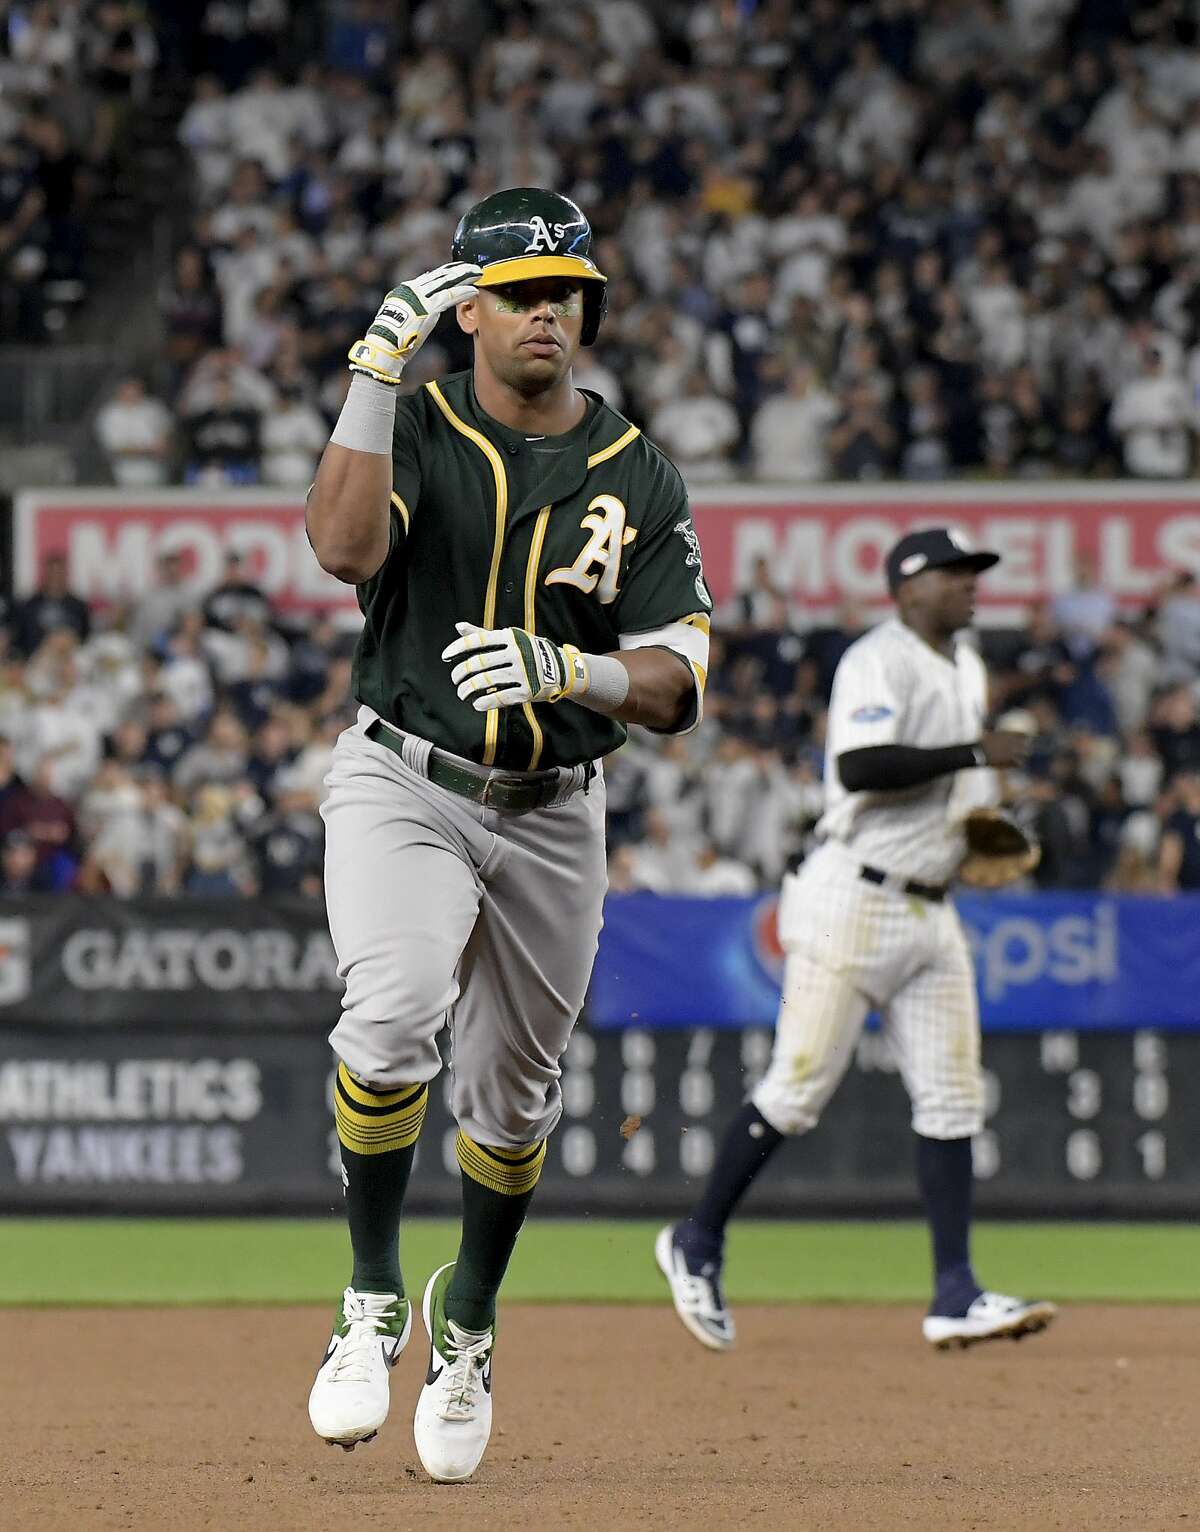 Oakland Athletics' Khris Davis reacts as he rounds the bases after hitting a two-run home run against the New York Yankees during the eighth inning of the American League wild-card playoff baseball game, Wednesday, Oct. 3, 2018, in New York. (AP Photo/Bill Kostroun)